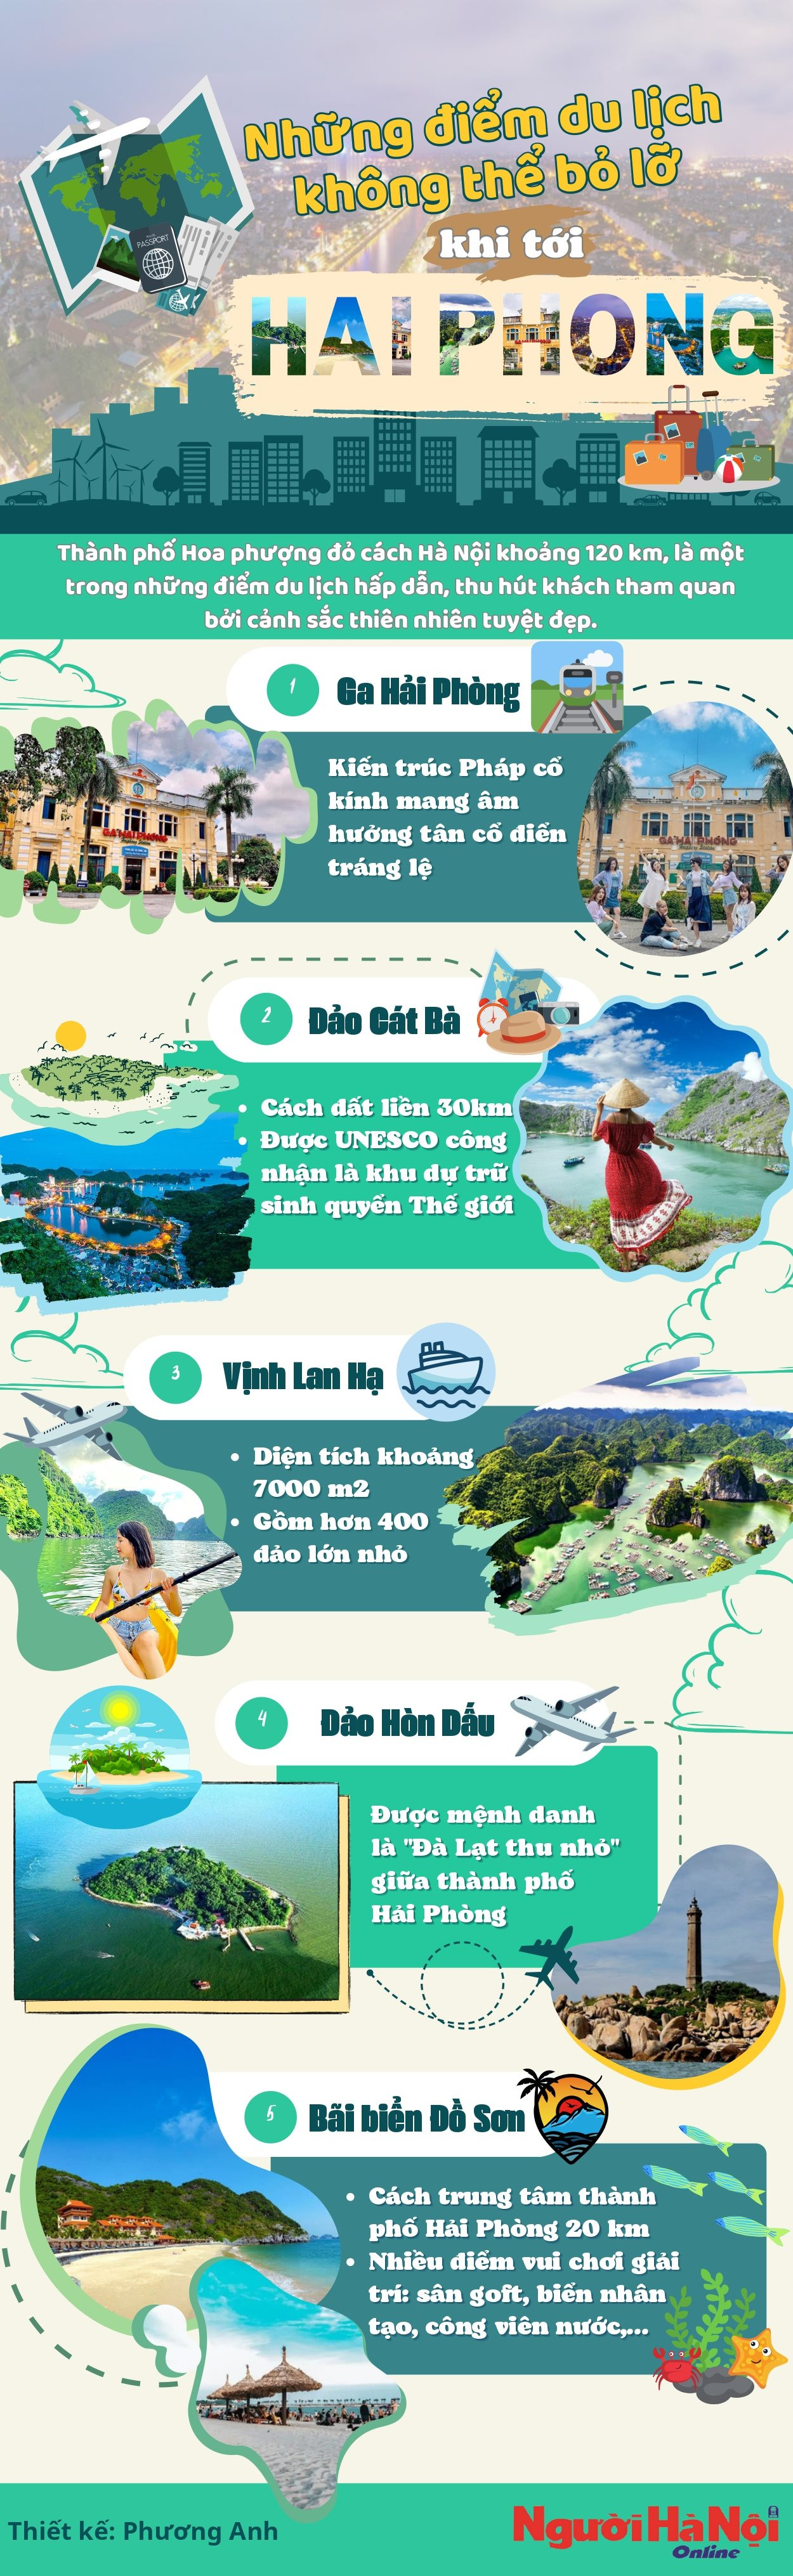 green-playful-illustrative-traveling-tips-infographic-800-3000-px-800-2600-px-3-_page-0001.jpg